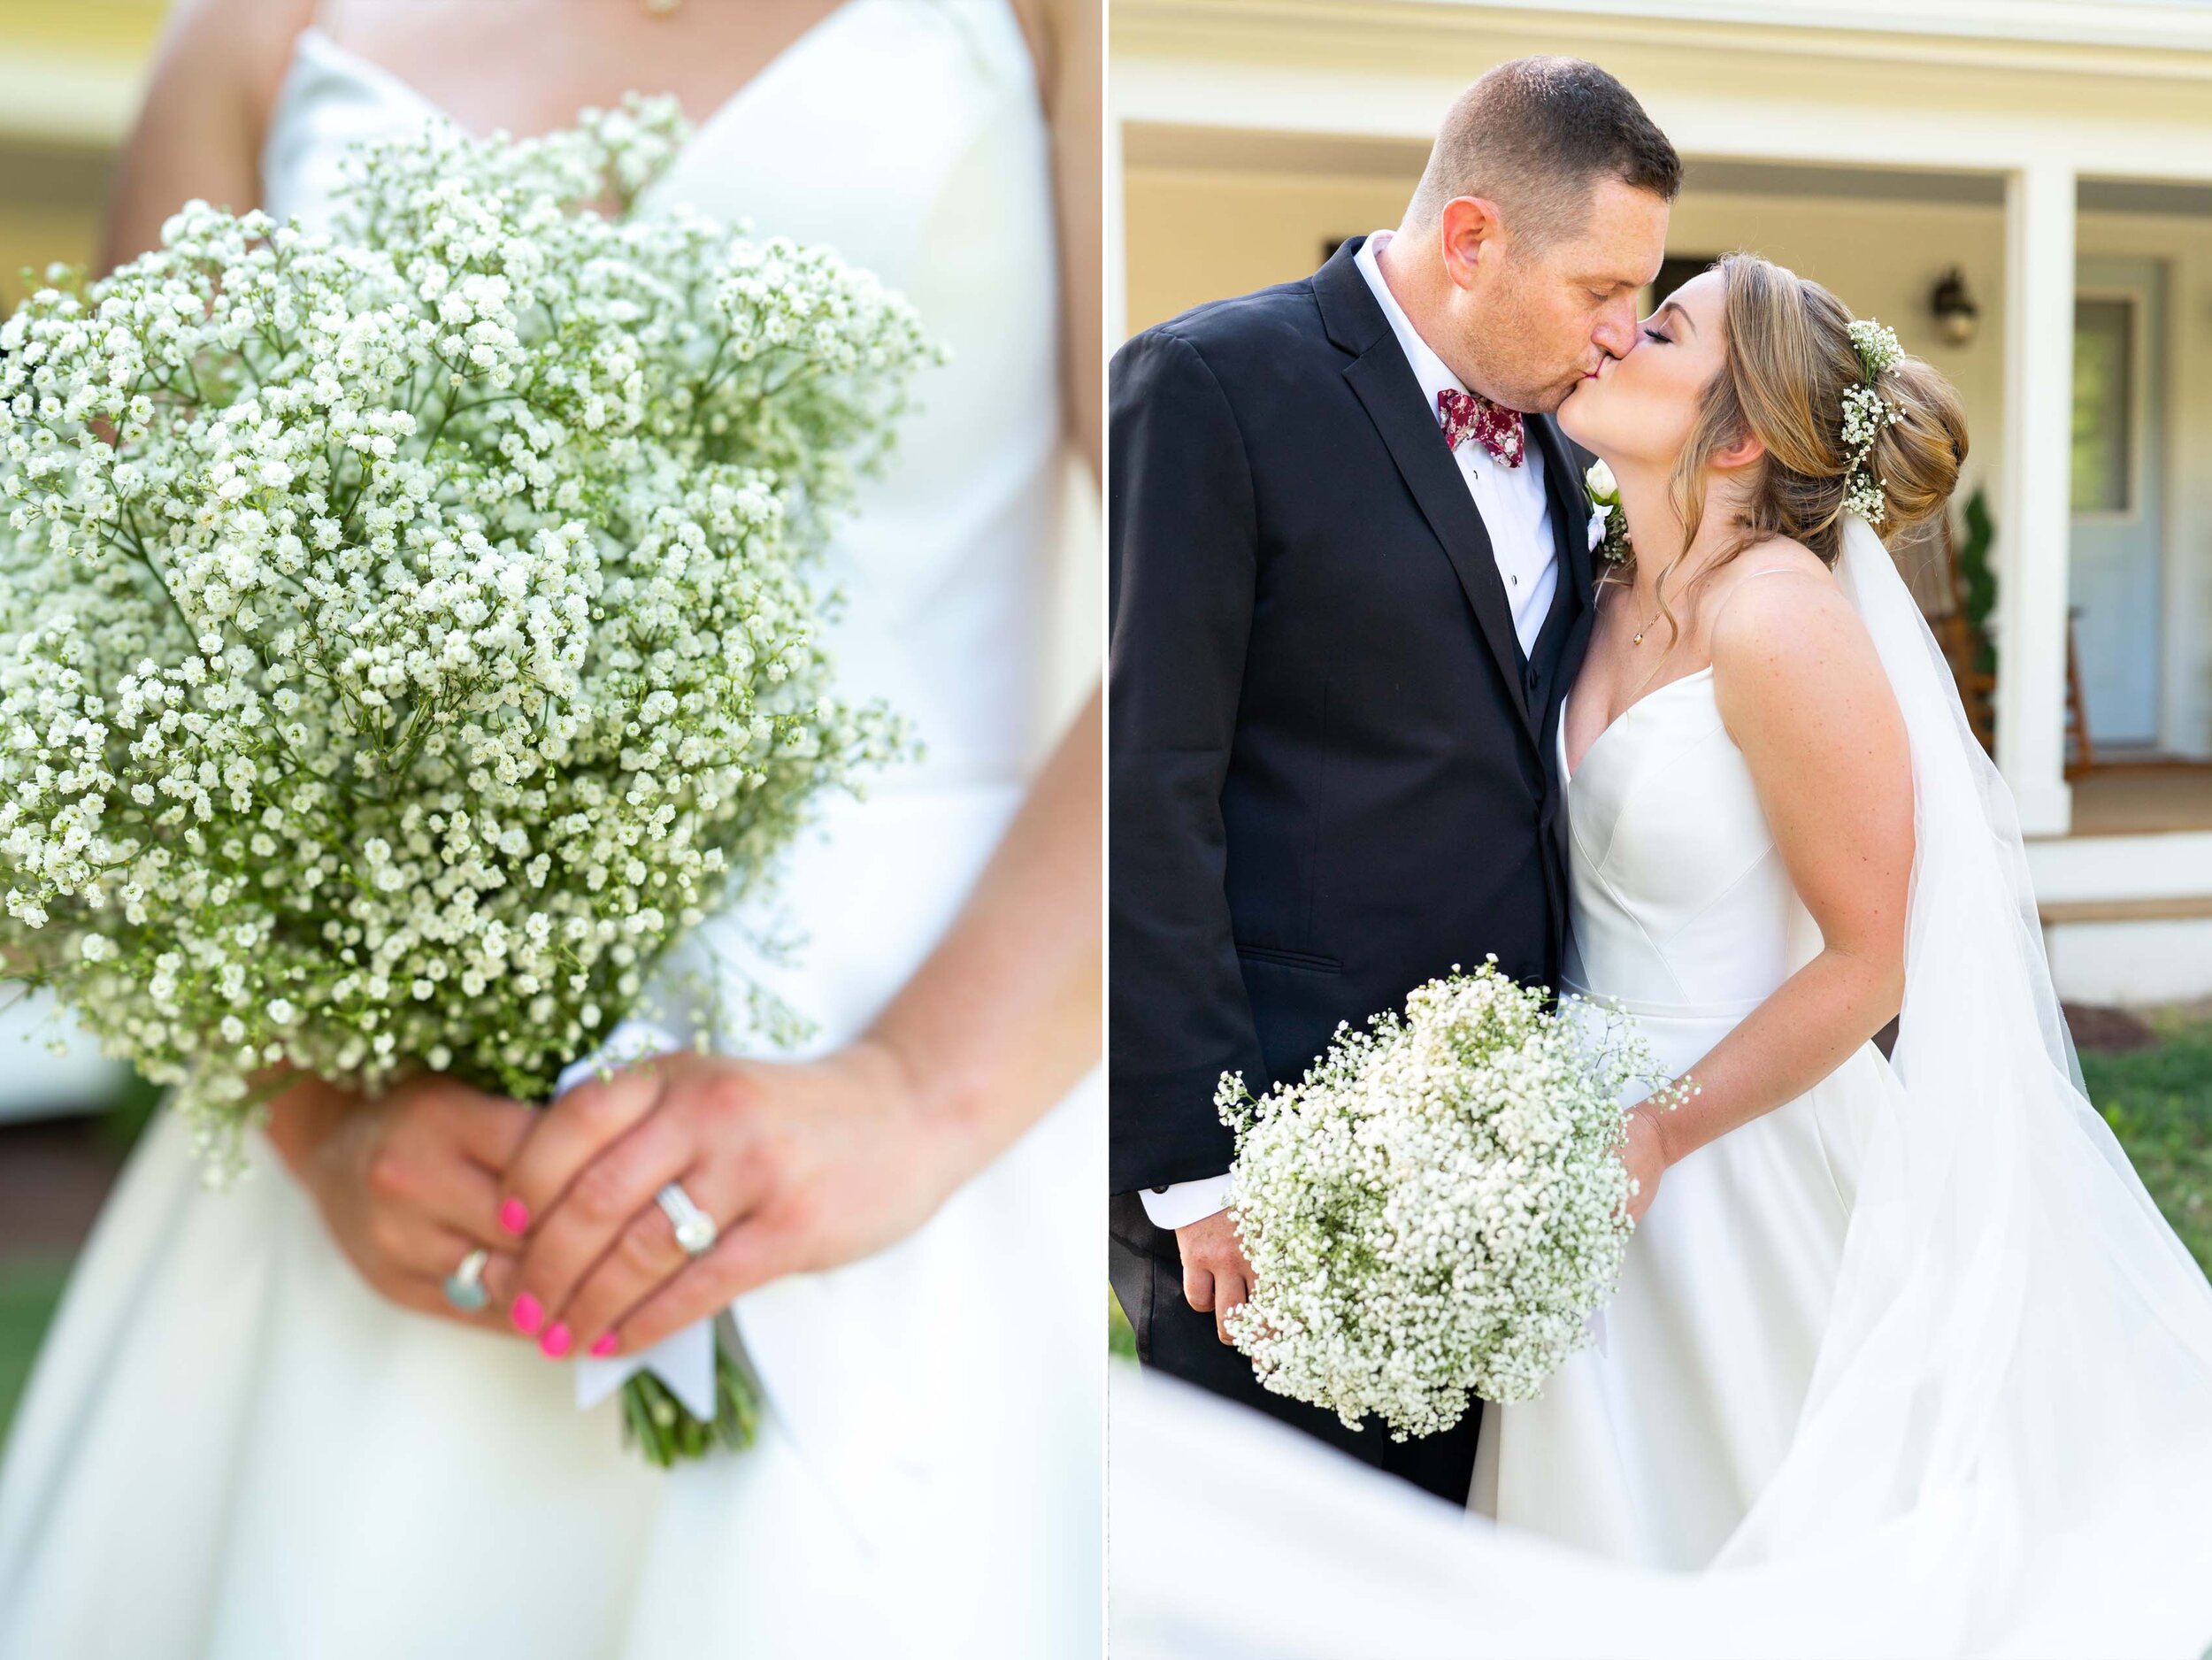 Bride holding baby's breath bouquet in Suzanne Neville River gown